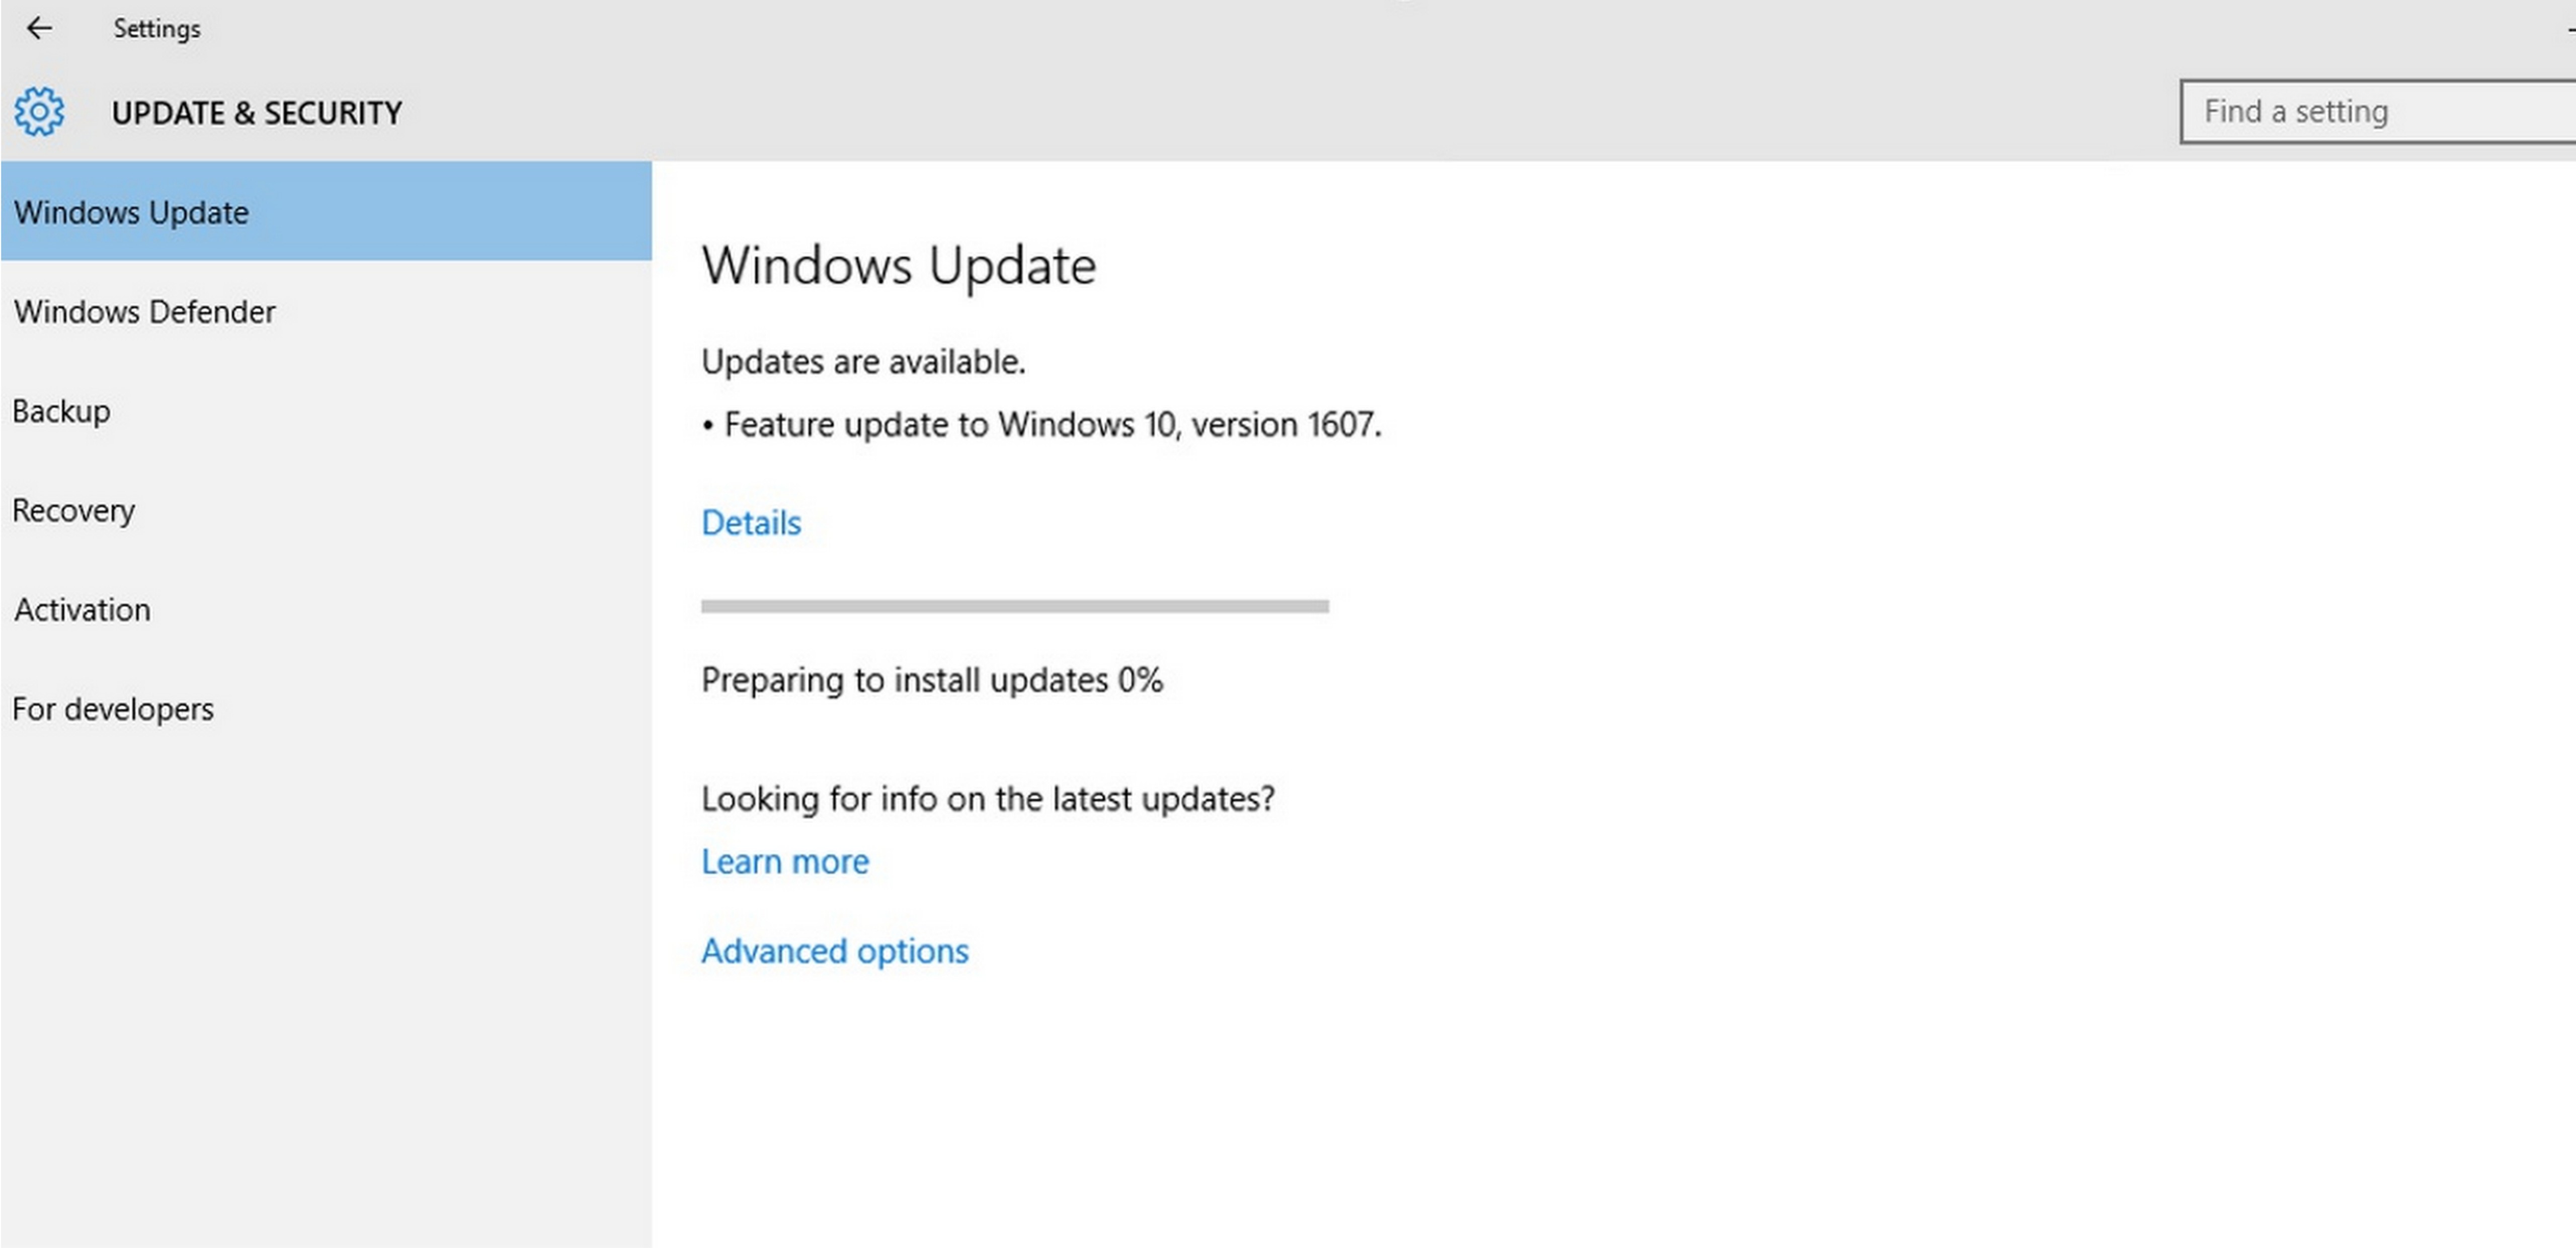 Click on Check for updates and wait for Windows to search for available updates.
If any updates are found, click on Download and install to update your system.